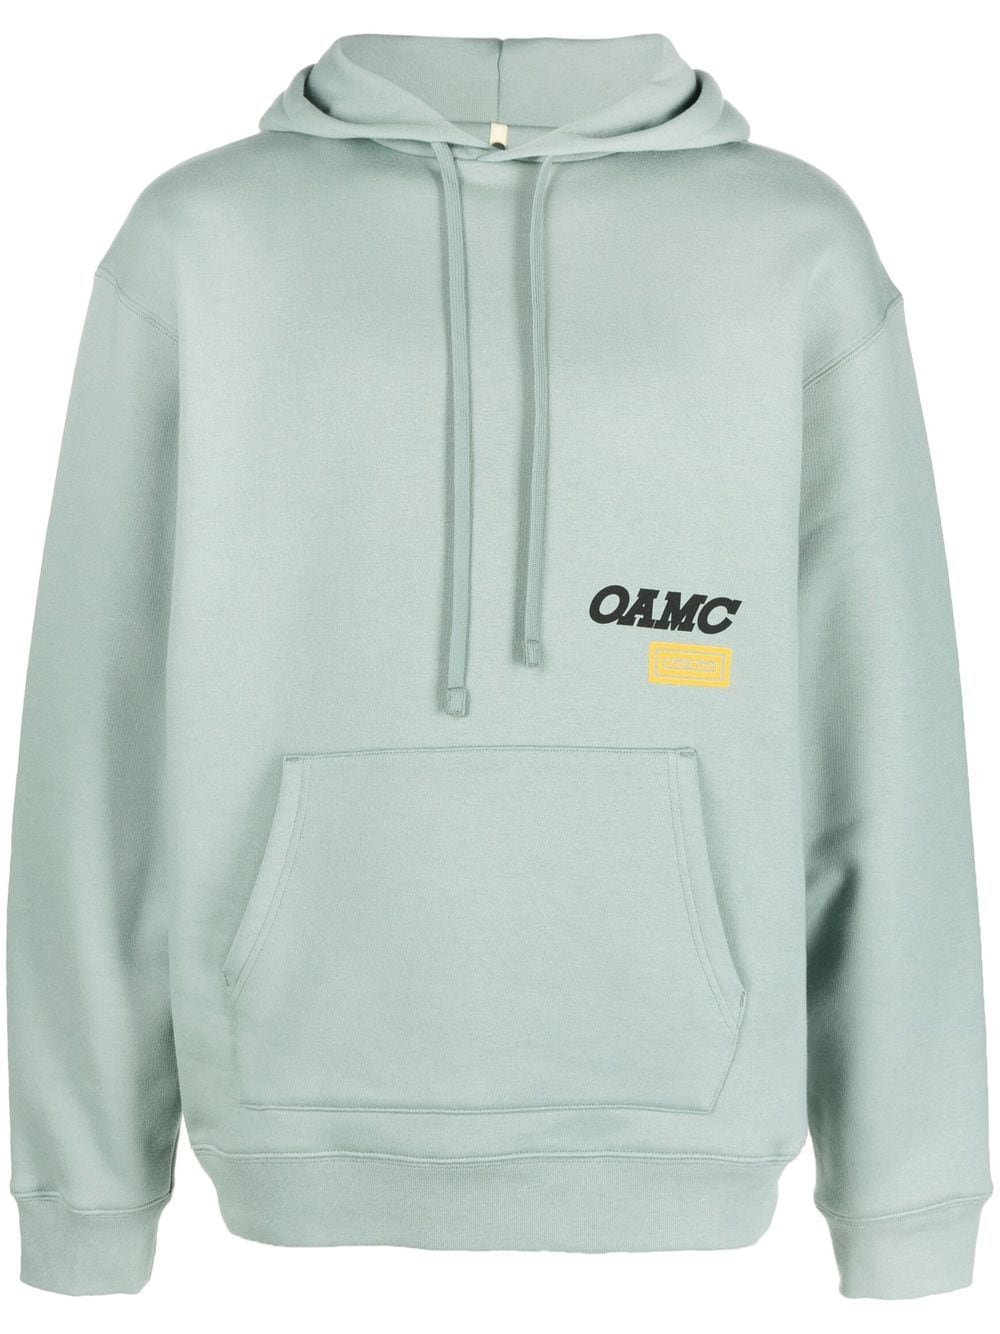 OAMC WHIRL HOODIE  KNITTED